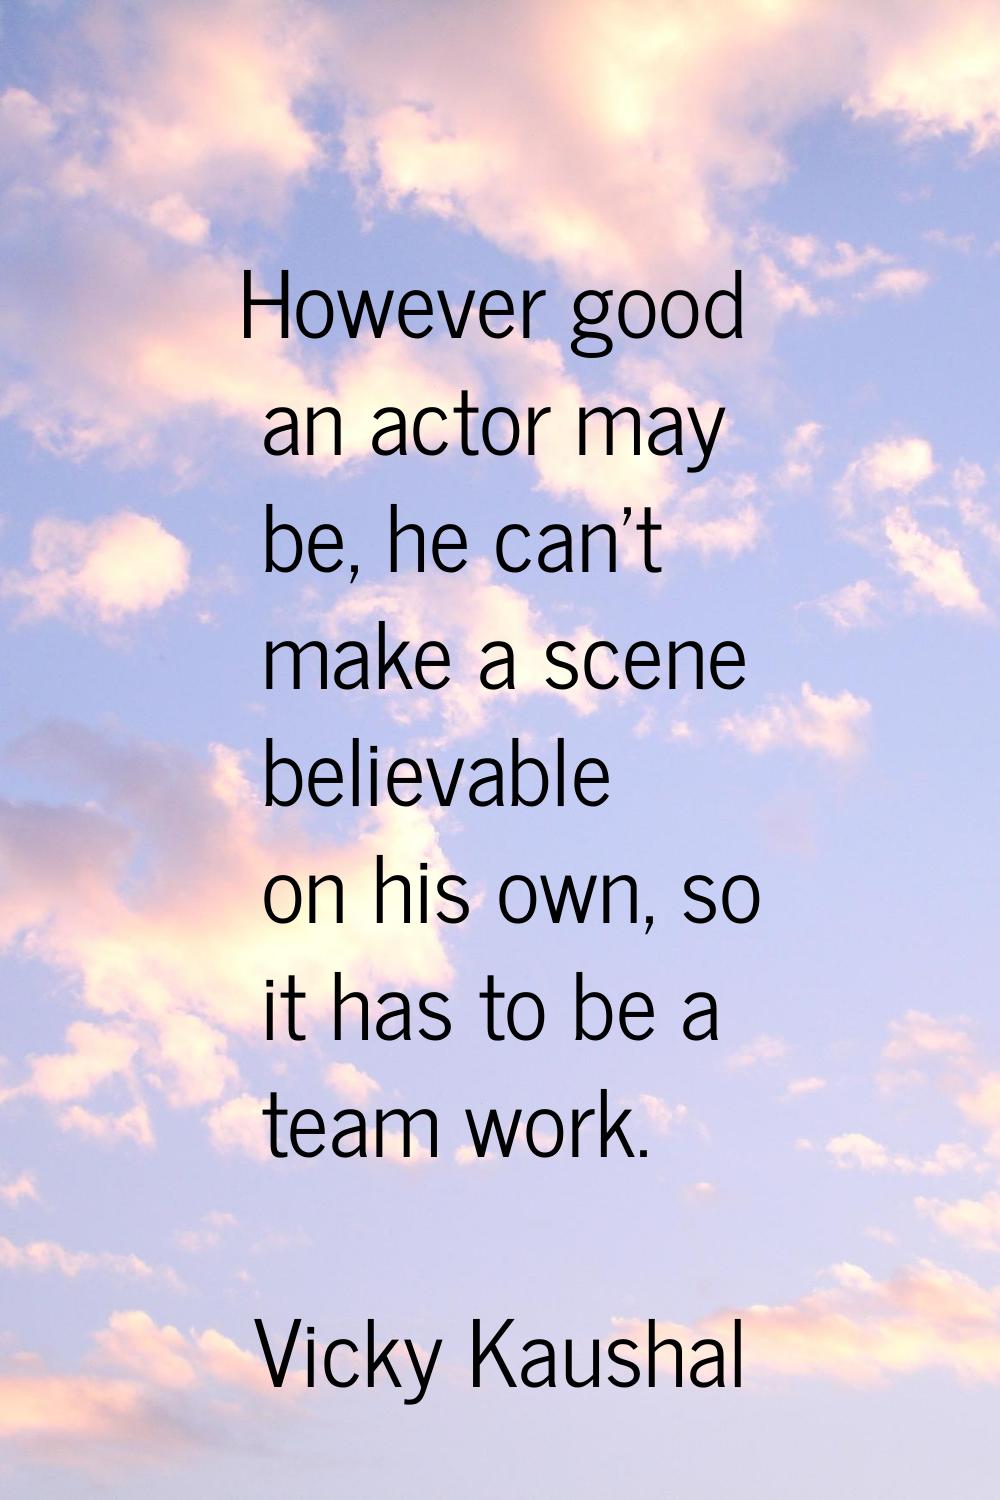 However good an actor may be, he can't make a scene believable on his own, so it has to be a team w